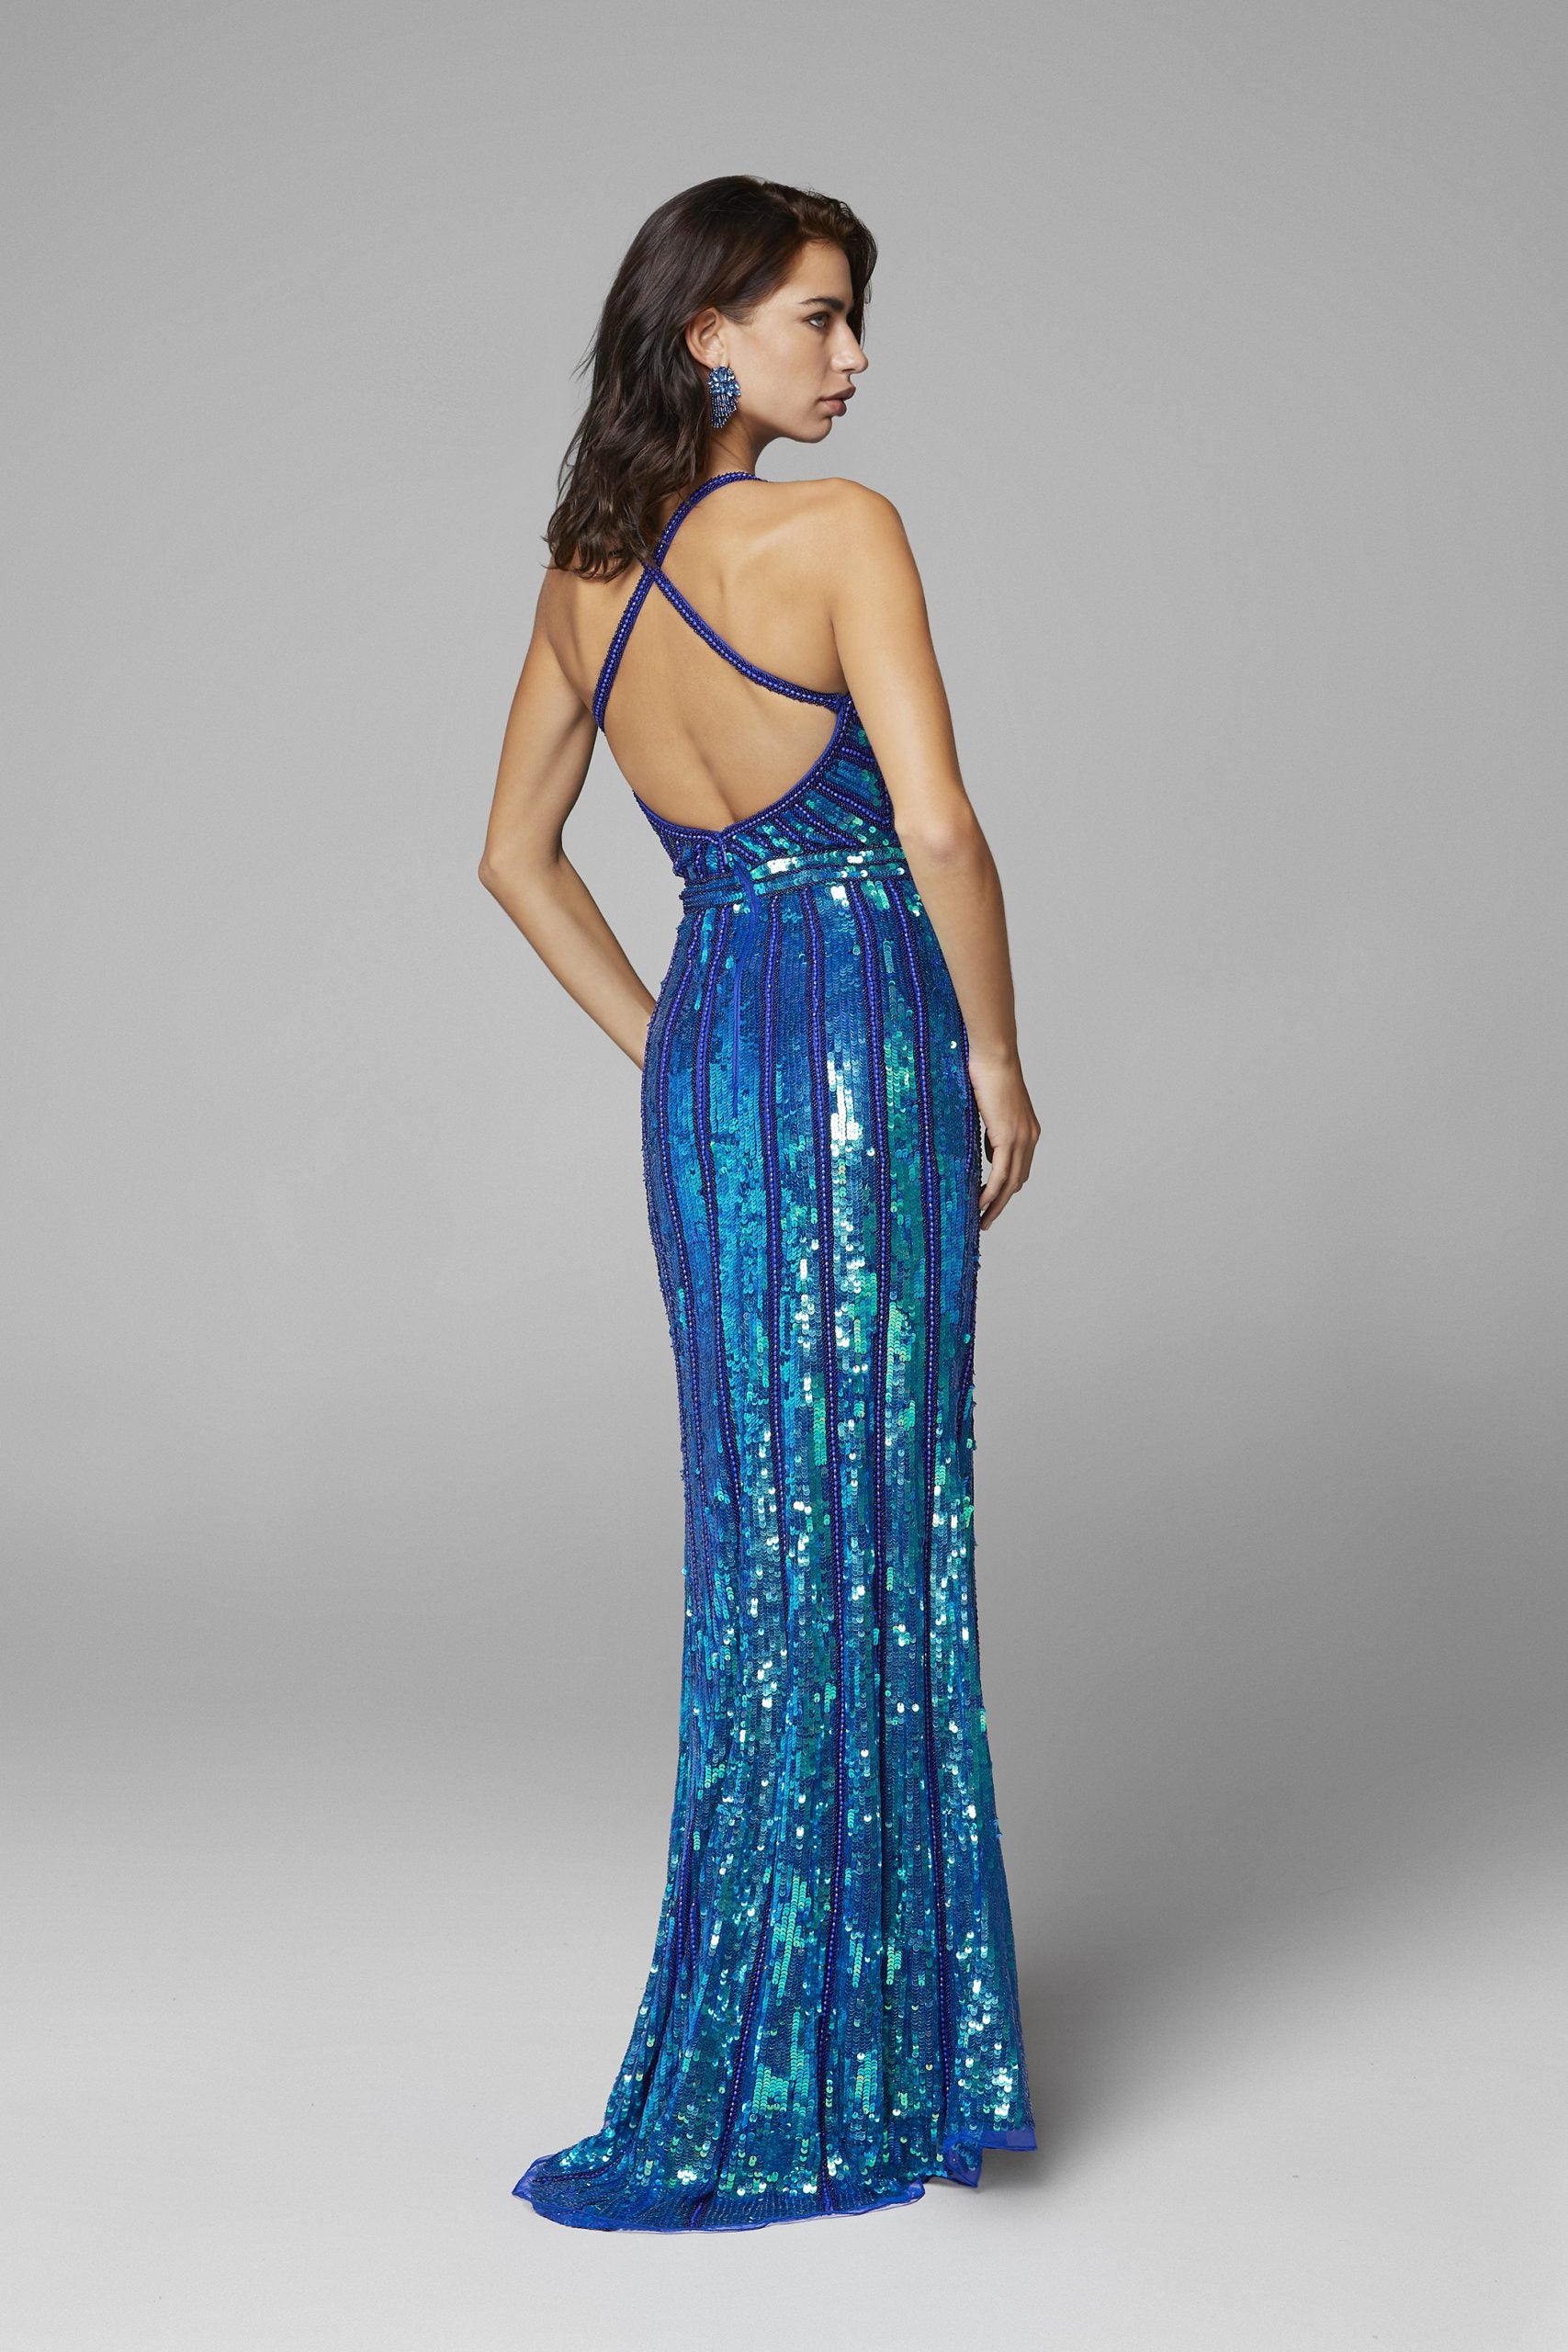 Primavera Couture 3441 is a iridescent sequins long formal Prom Dress, Pageant Gown, Wedding Dress & Formal Evening Wear gown. Featuring a v neckline with Iridescent Multi sequins and Hand Embellishments. This evening gown is perfect for any formal event! Slit in skirt. Available colors:  Ivory, Royal Blue, Teal, Peacock, Pink, Raspberry Available sizes:  00,0,2,4,6,8,10,12,14,16,18